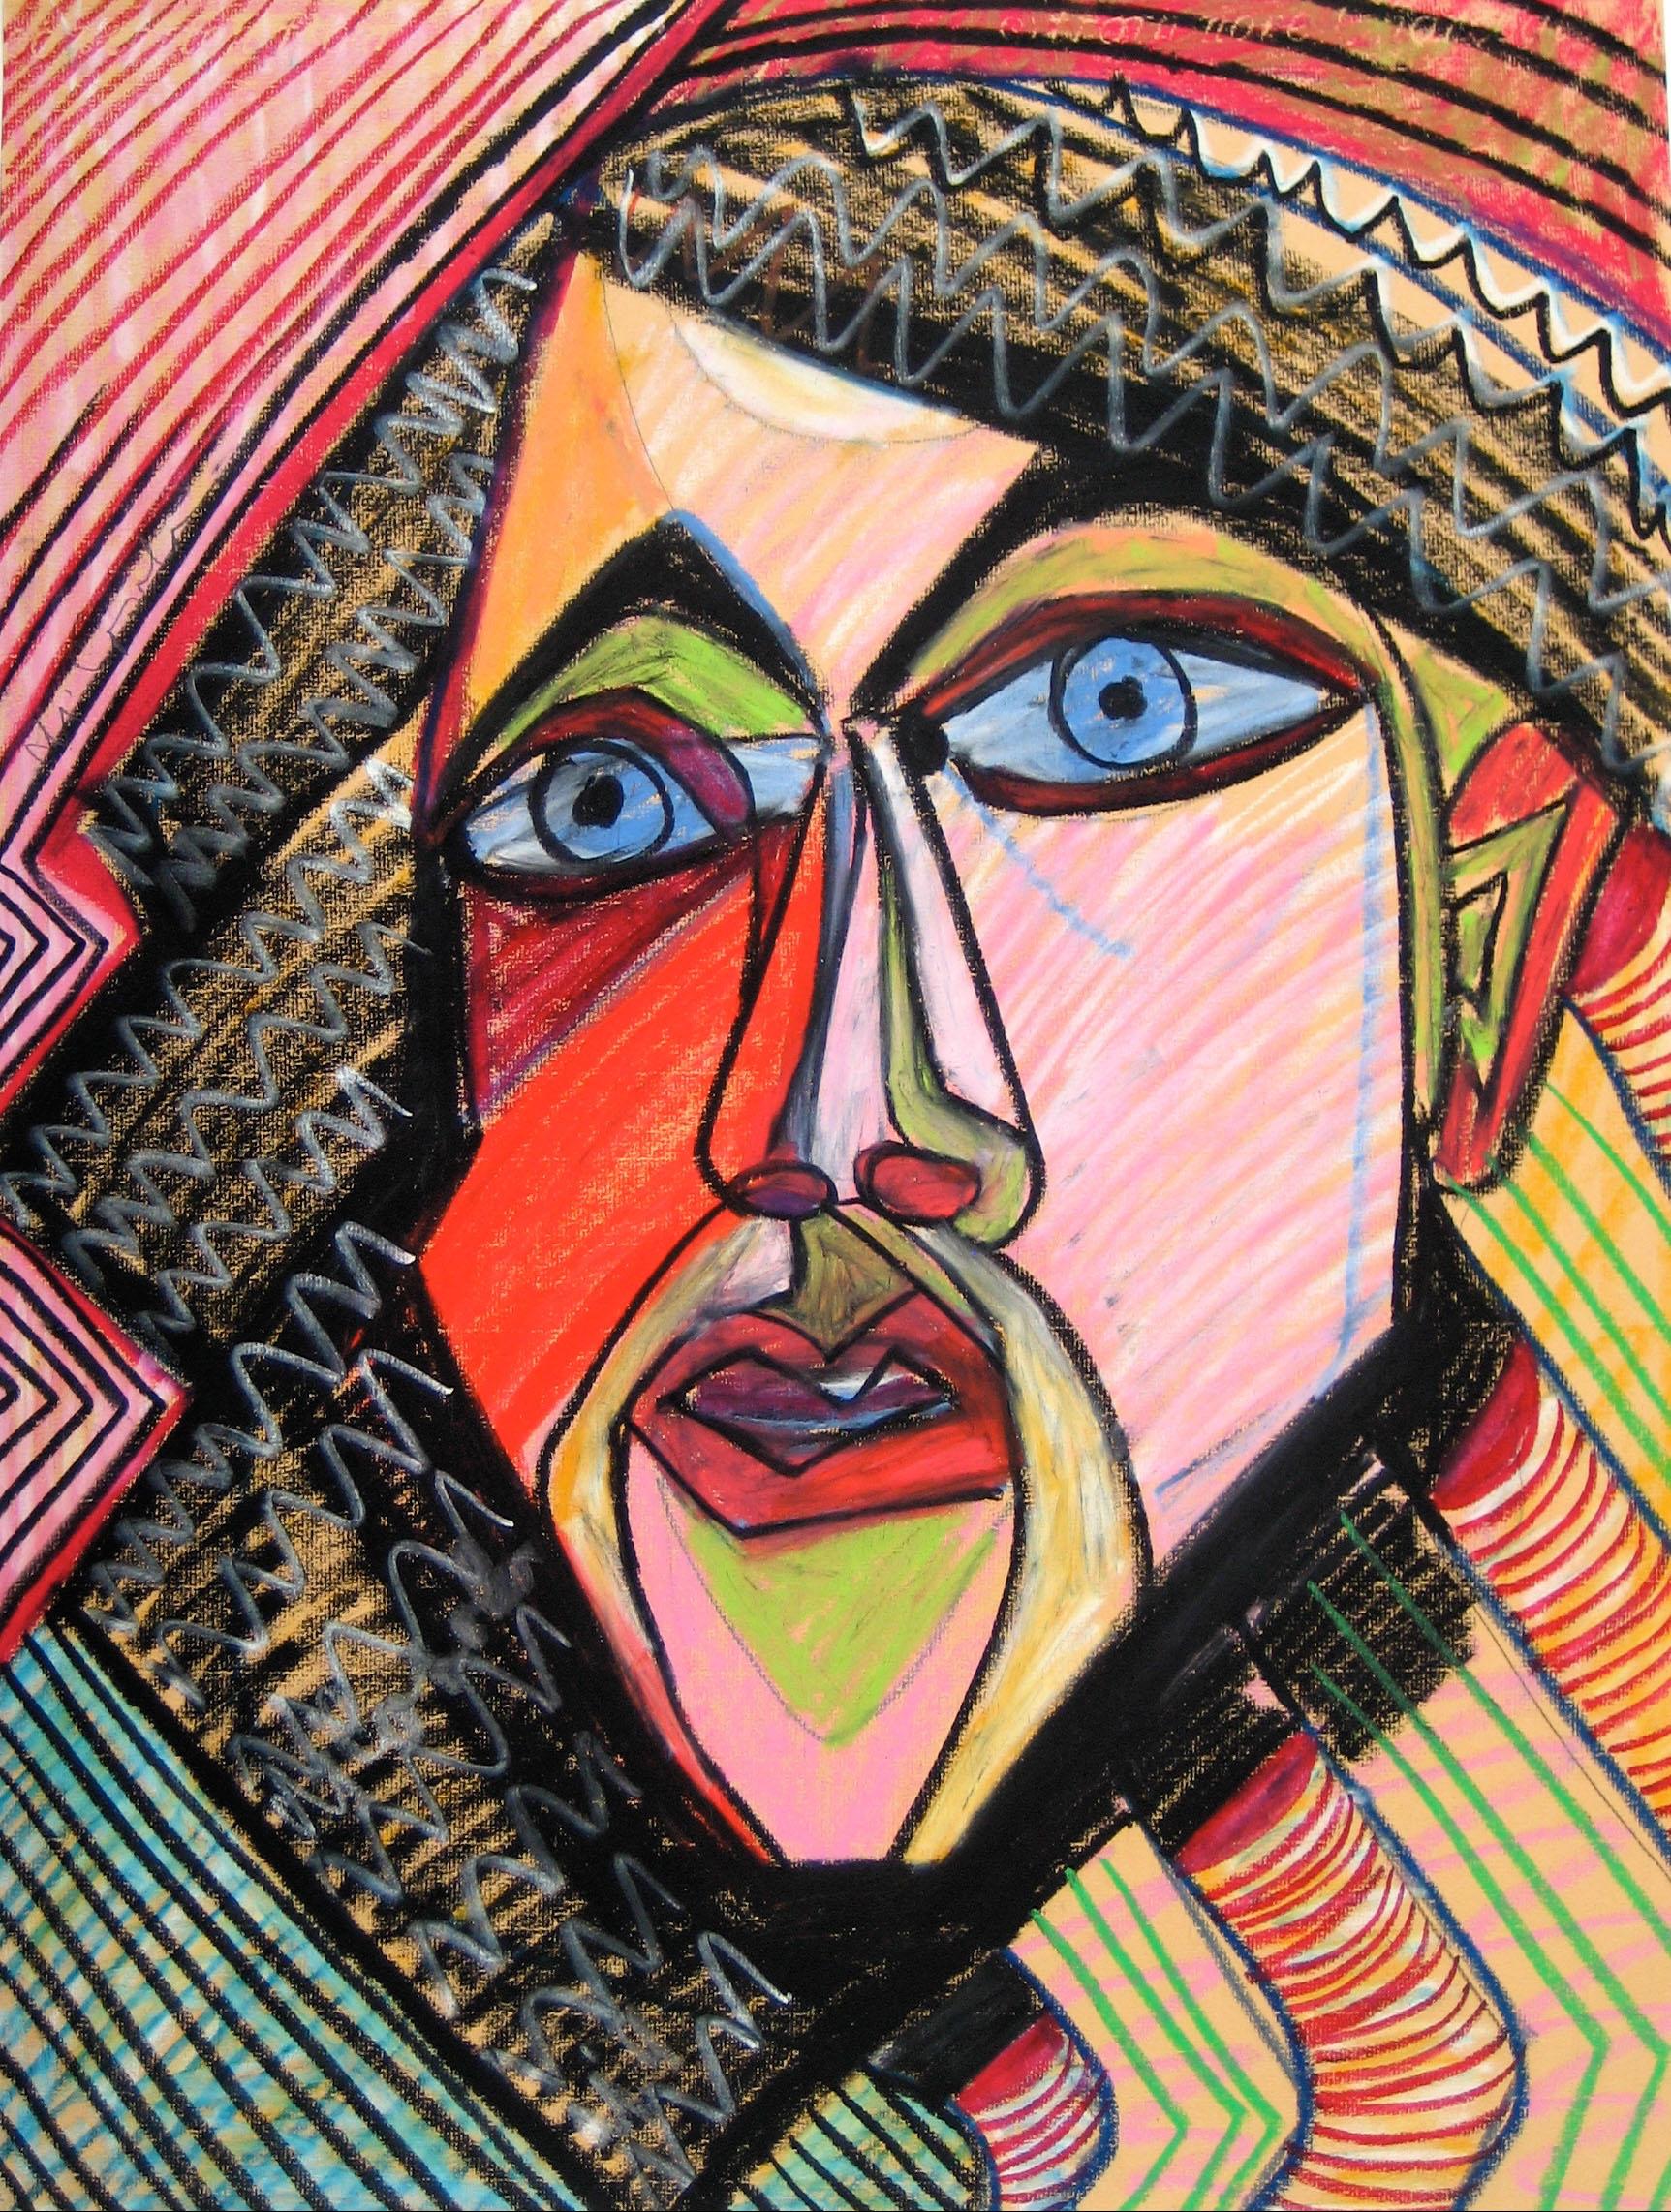 Colorful Surrealist Portrait of a Man in Pastel - Art by Michael di Cosola